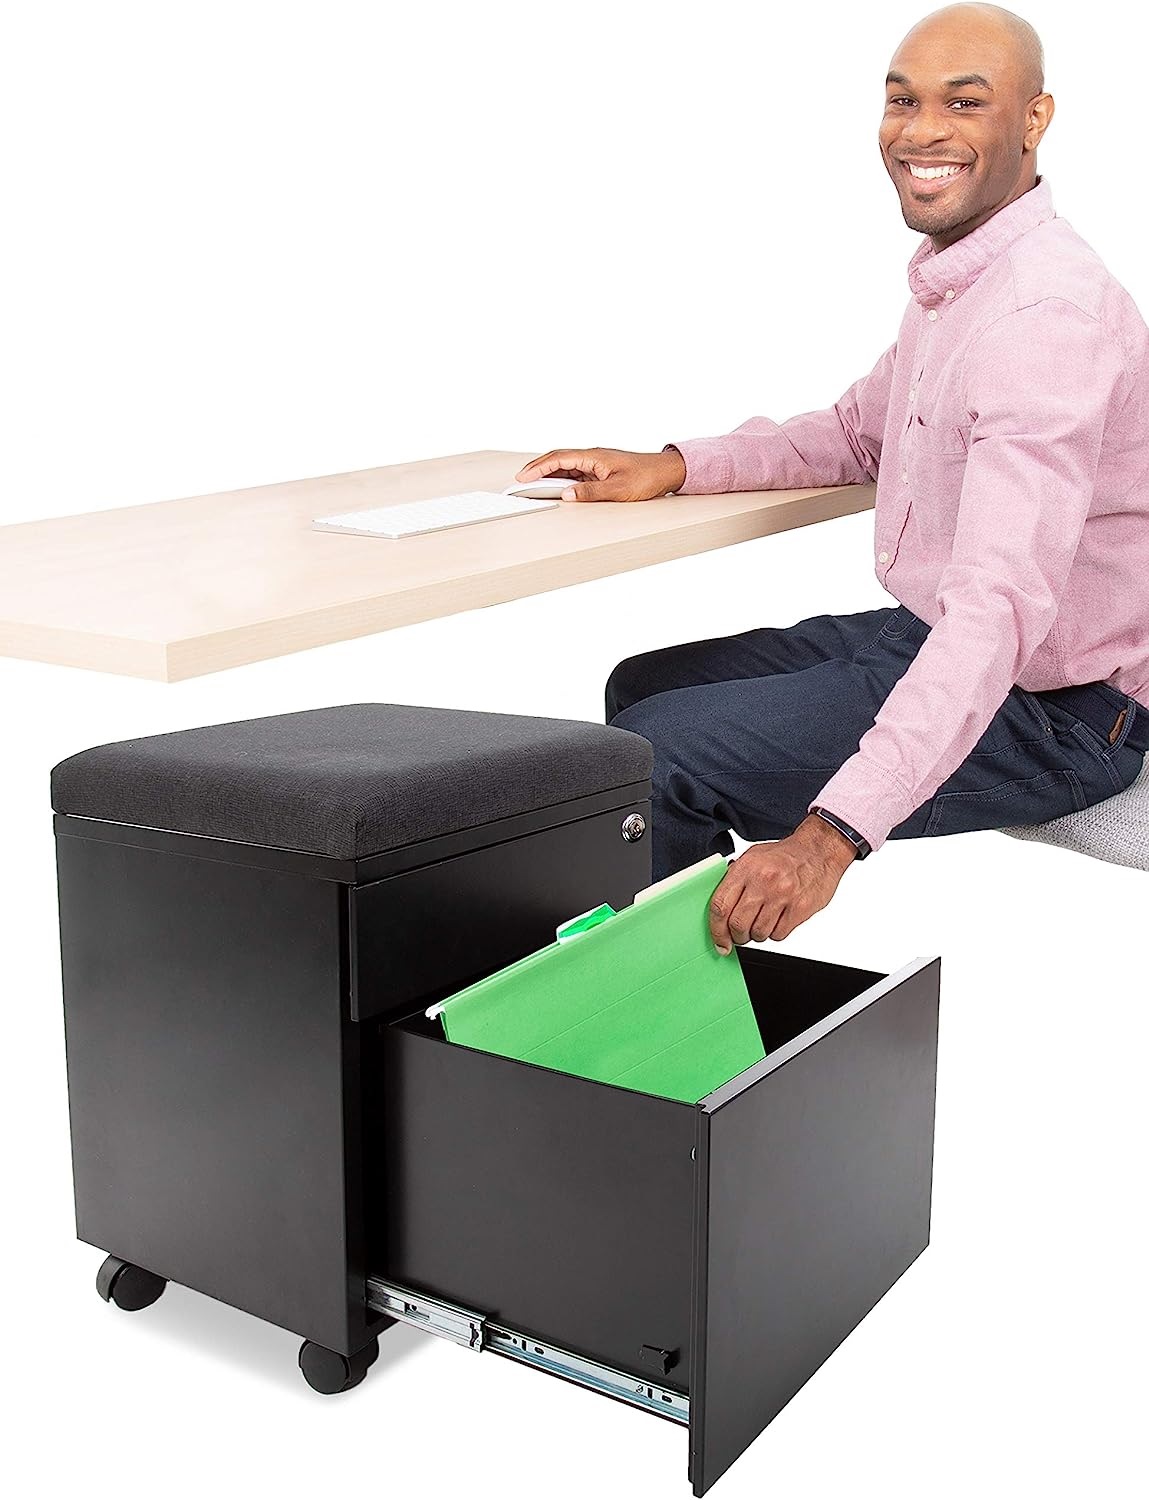 Stand Steady Vert | Rolling File Cabinet | 2 Drawer Mobile File Cabinet with Locking Storage | Small Filing Cabinet with Cushion Top for an Extra Place to Sit | Perfect for Home & Office! (Black) - image 1 of 8